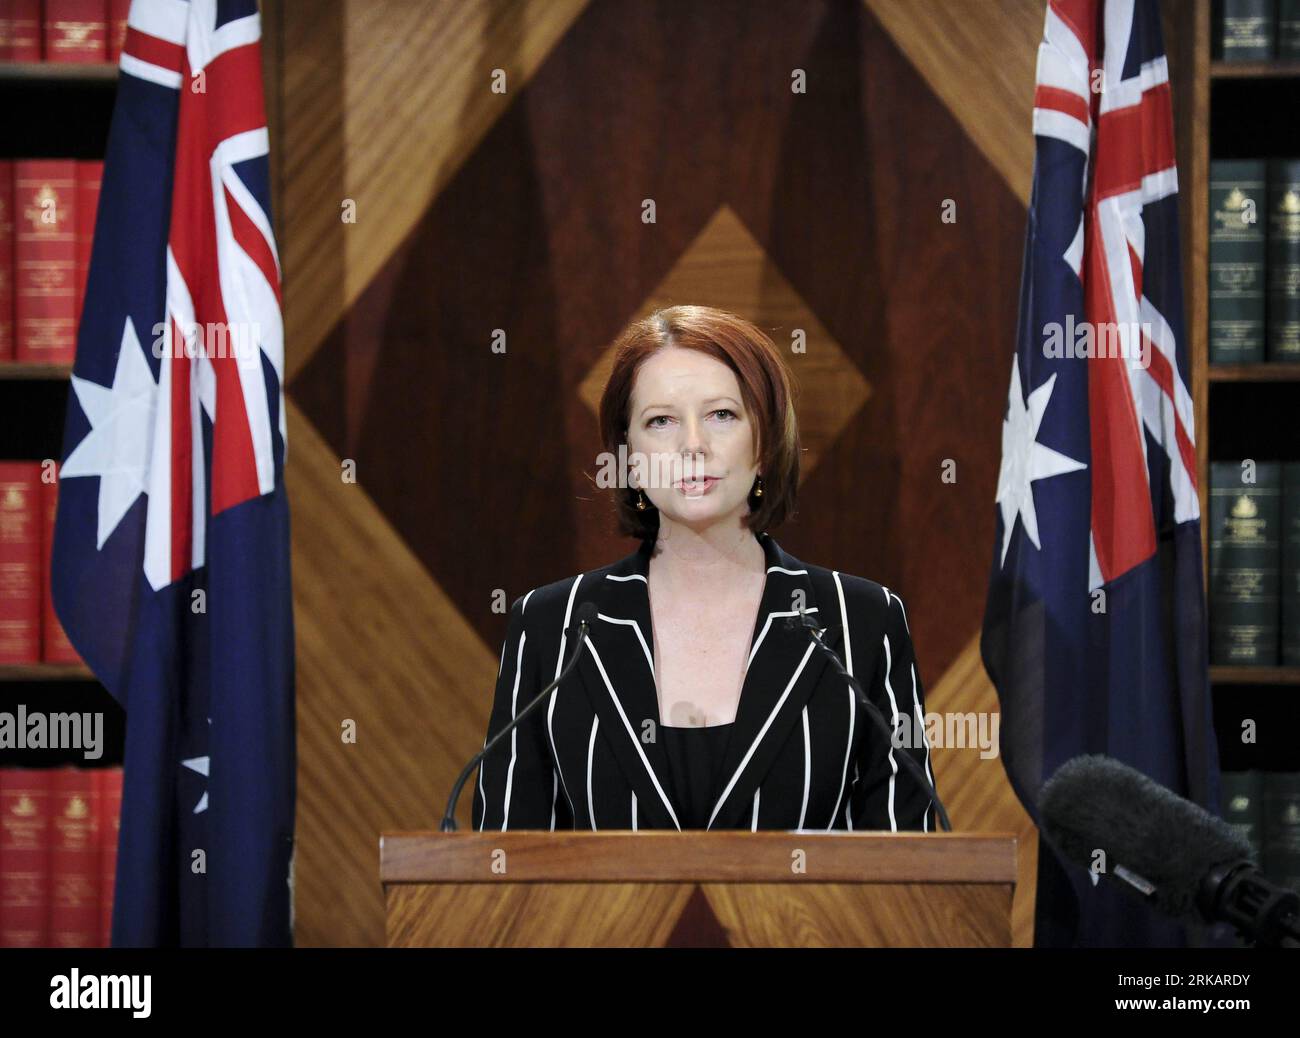 Bildnummer: 54418612  Datum: 11.09.2010  Copyright: imago/Xinhua (100911) -- MELBOURNE, Sep. 11, 2010 (Xinhua) -- Australian Prime Minister Julia Gillard announces her new cabinet for the Labor Government in next term in the Commonwealth Office in Melbourne, Australia, Sep 11, 2010. Gillard confirmed that former Prime Minister Kevin Rudd would be given the Foreign Affairs portfolio. (Xinhua/Bai Xue) (yc) AUSTRALIA-PRIME MINISTER-NEW CABINET PUBLICATIONxNOTxINxCHN People Politik kbdig xmk 2010 quer premiumd xint     Bildnummer 54418612 Date 11 09 2010 Copyright Imago XINHUA  Melbourne Sep 11 20 Stock Photo